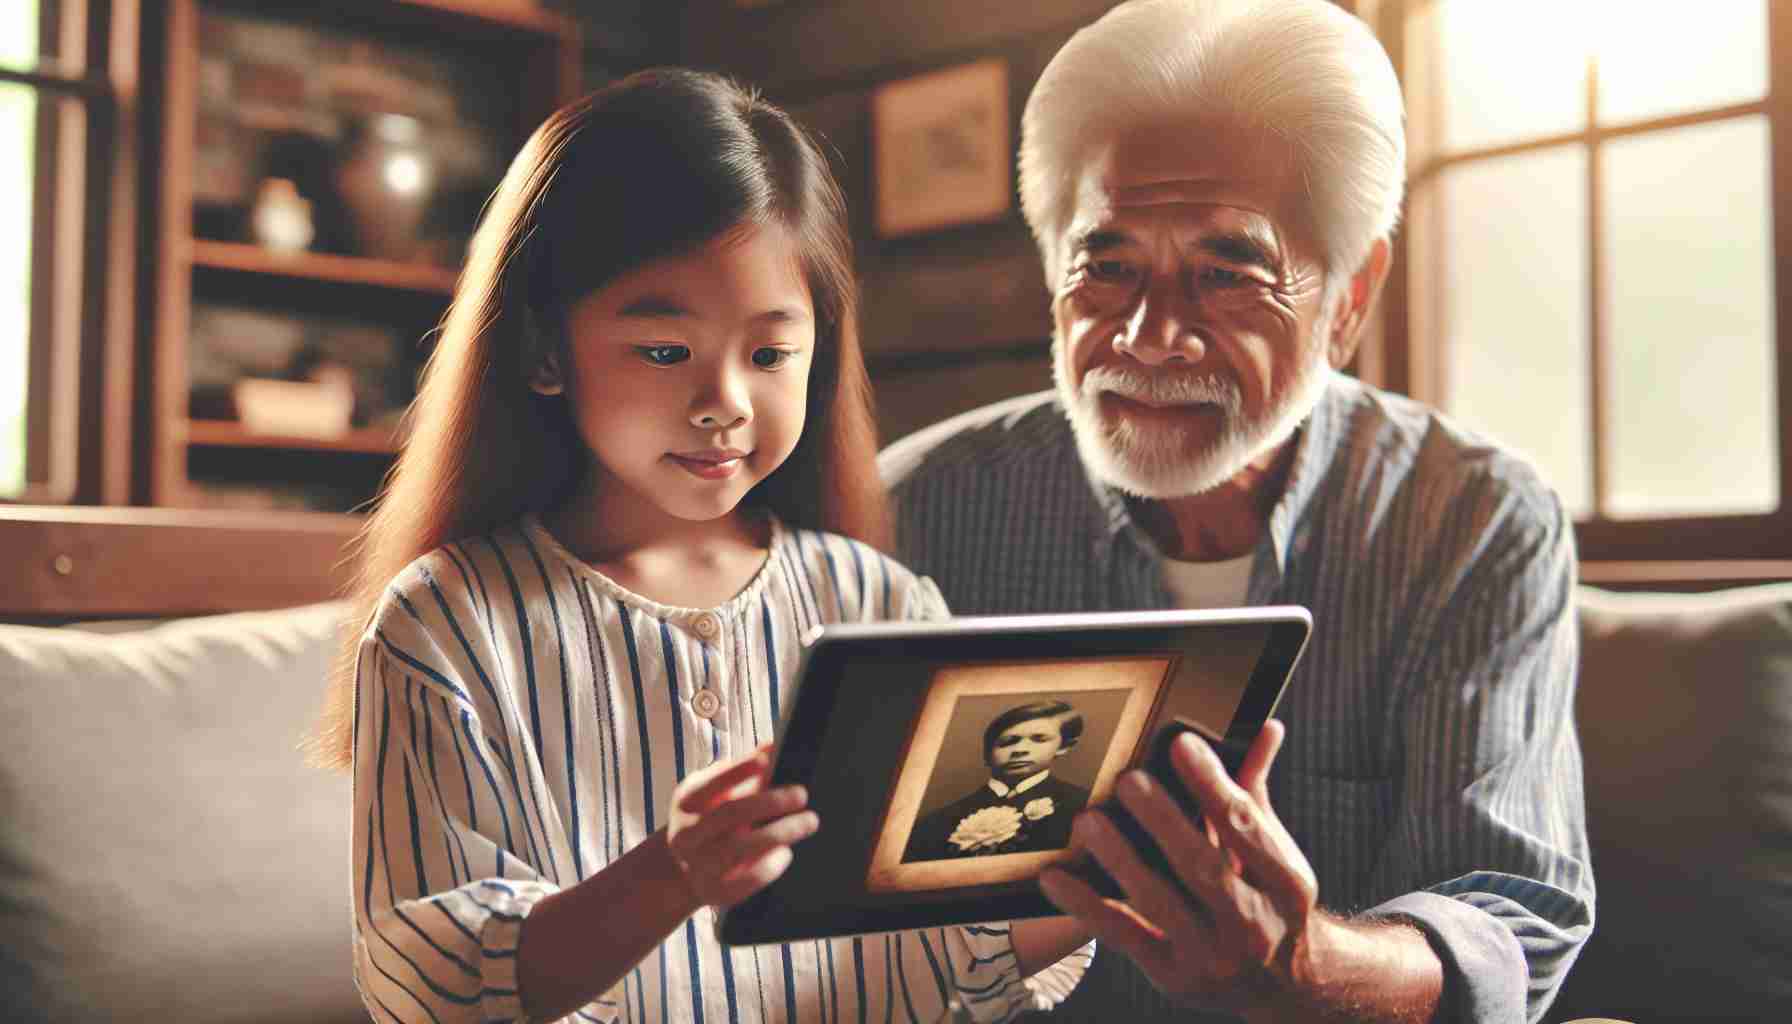 Embracing Memories Digitally: Can We Keep Our Loved Ones Close?